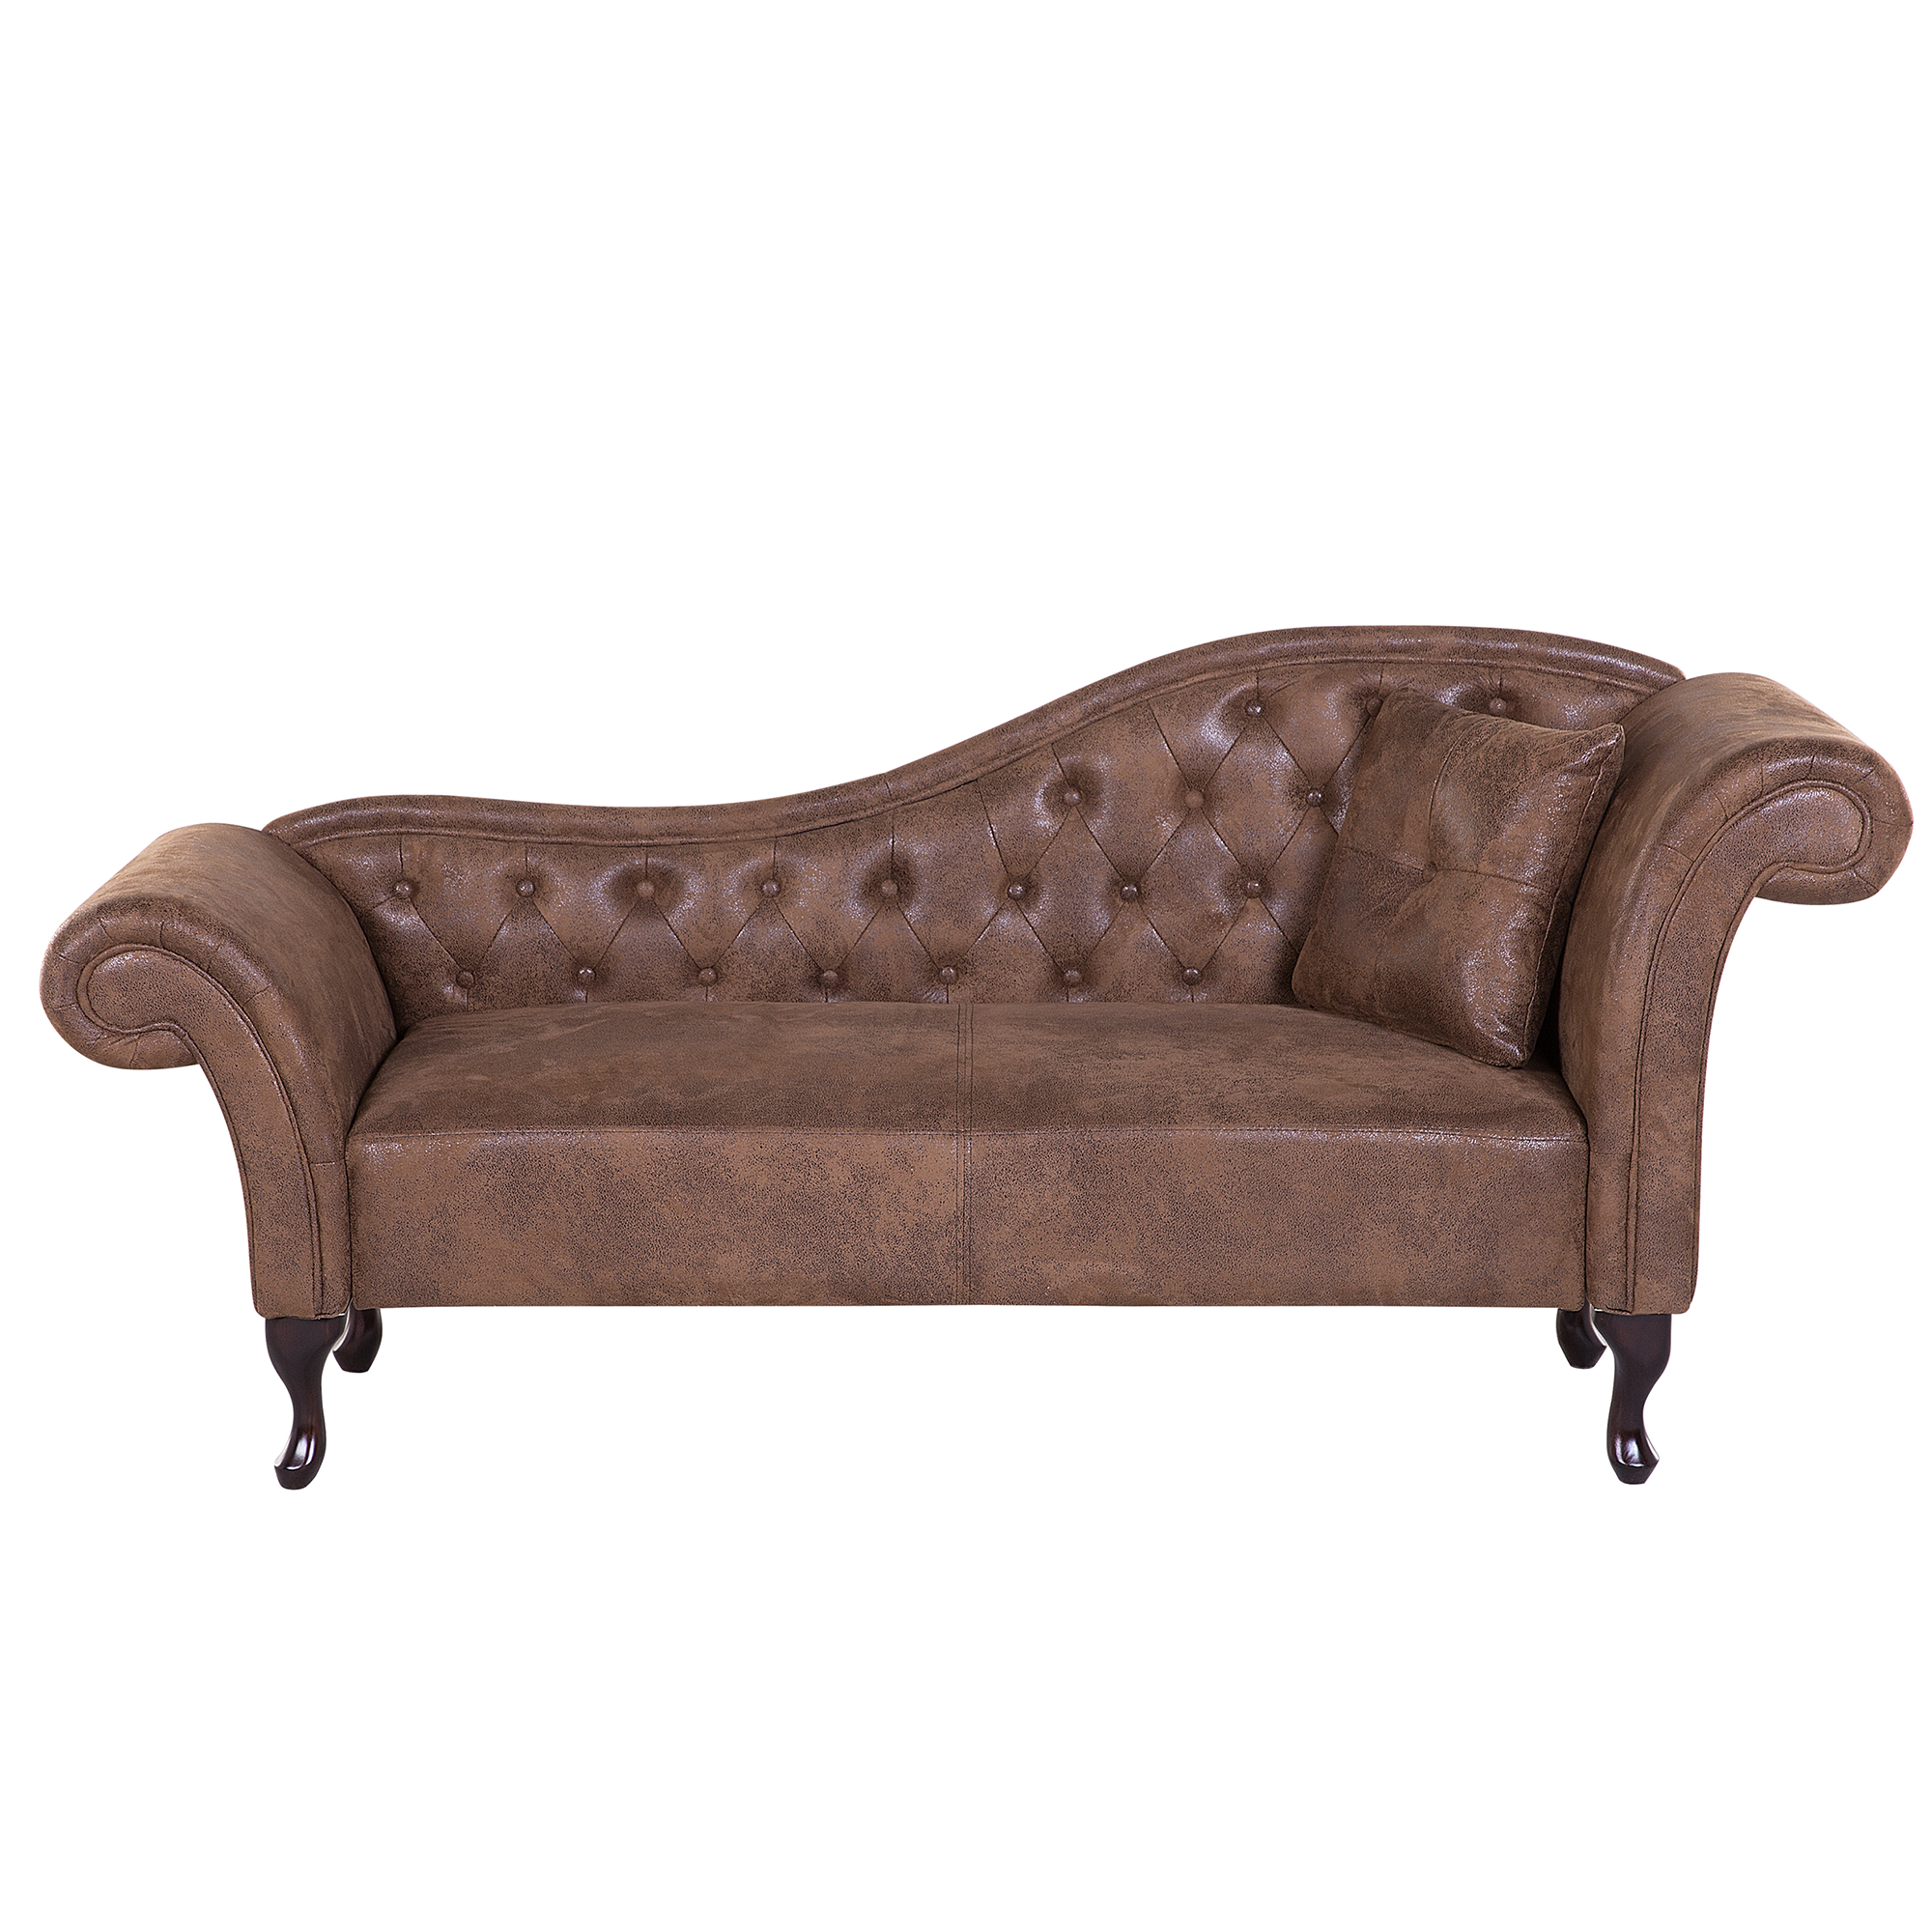 Beliani Chaise Lounge Brown Faux Suede Button Tufted Upholstery Right Hand Rolled Arms with Cushion